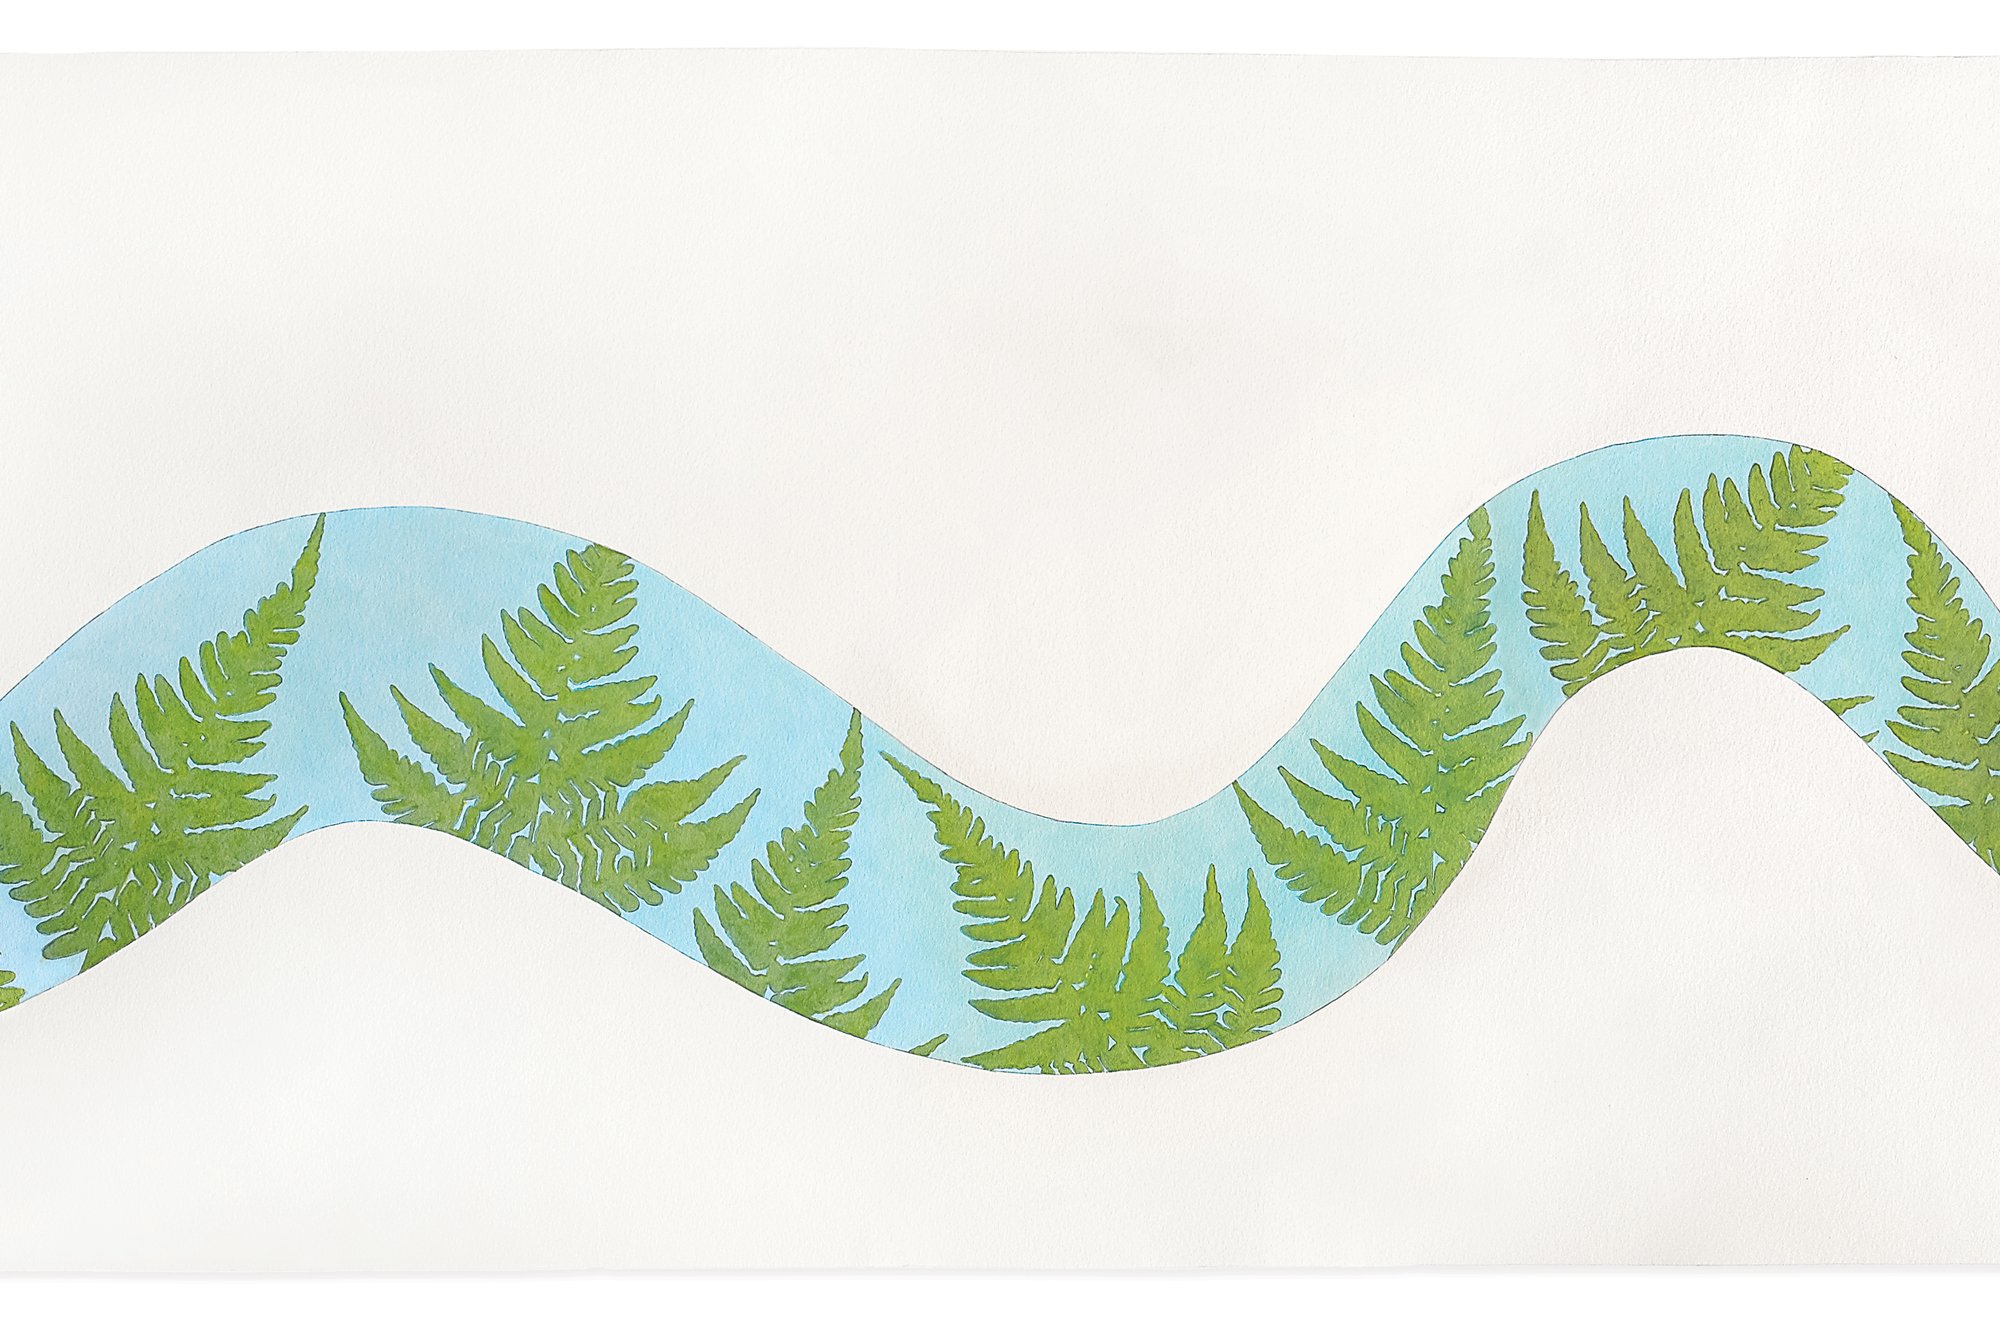   Shade Snake,  2022 Acrylic on paper, 15”x55” 